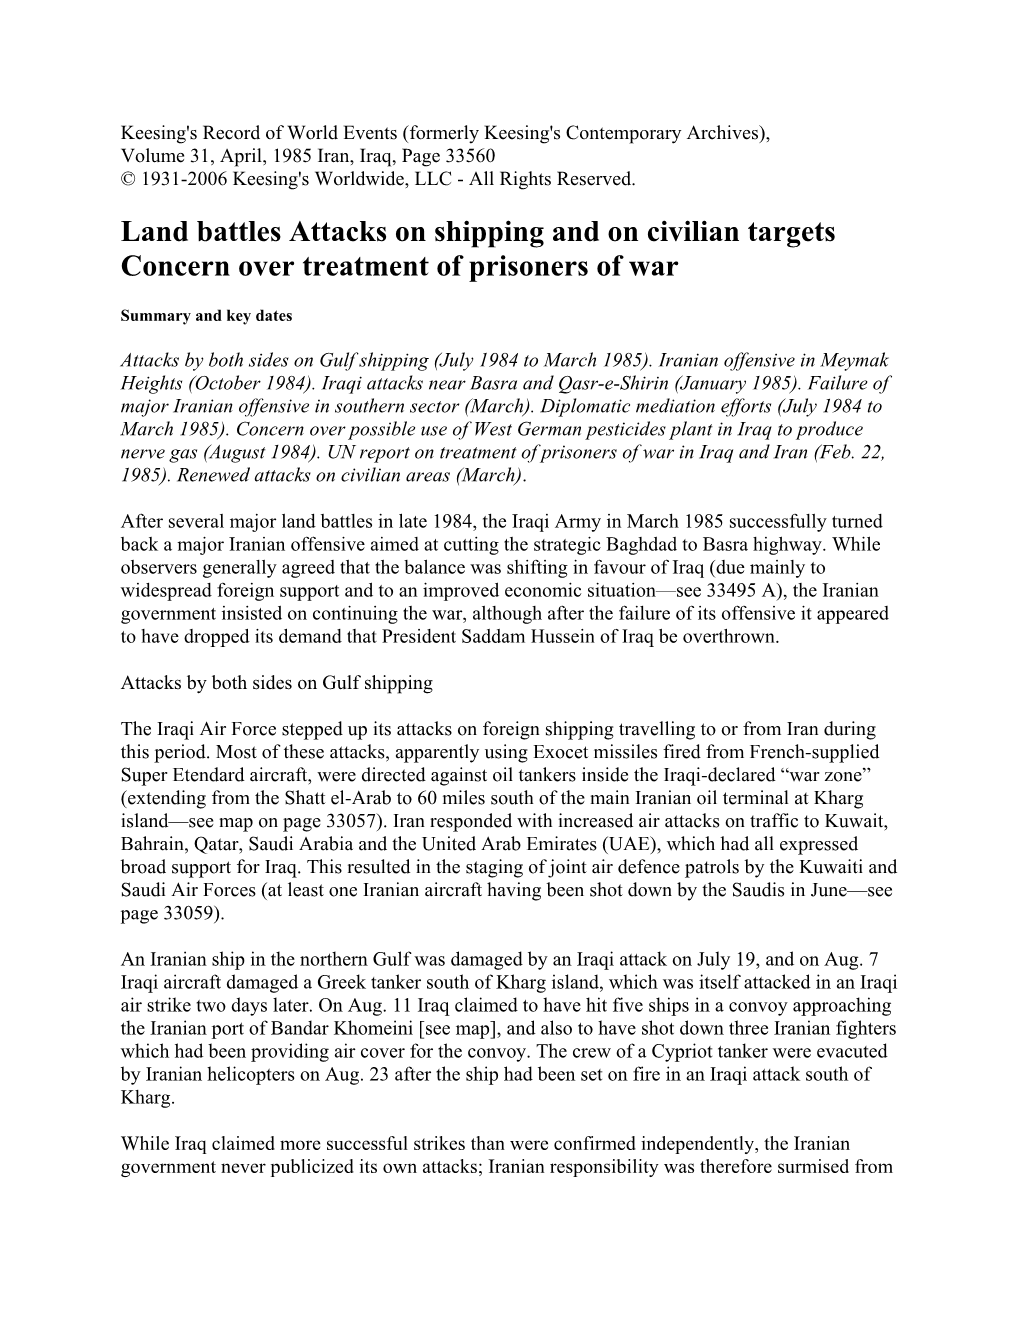 Land Battles Attacks on Shipping and on Civilian Targets Concern Over Treatment of Prisoners of War